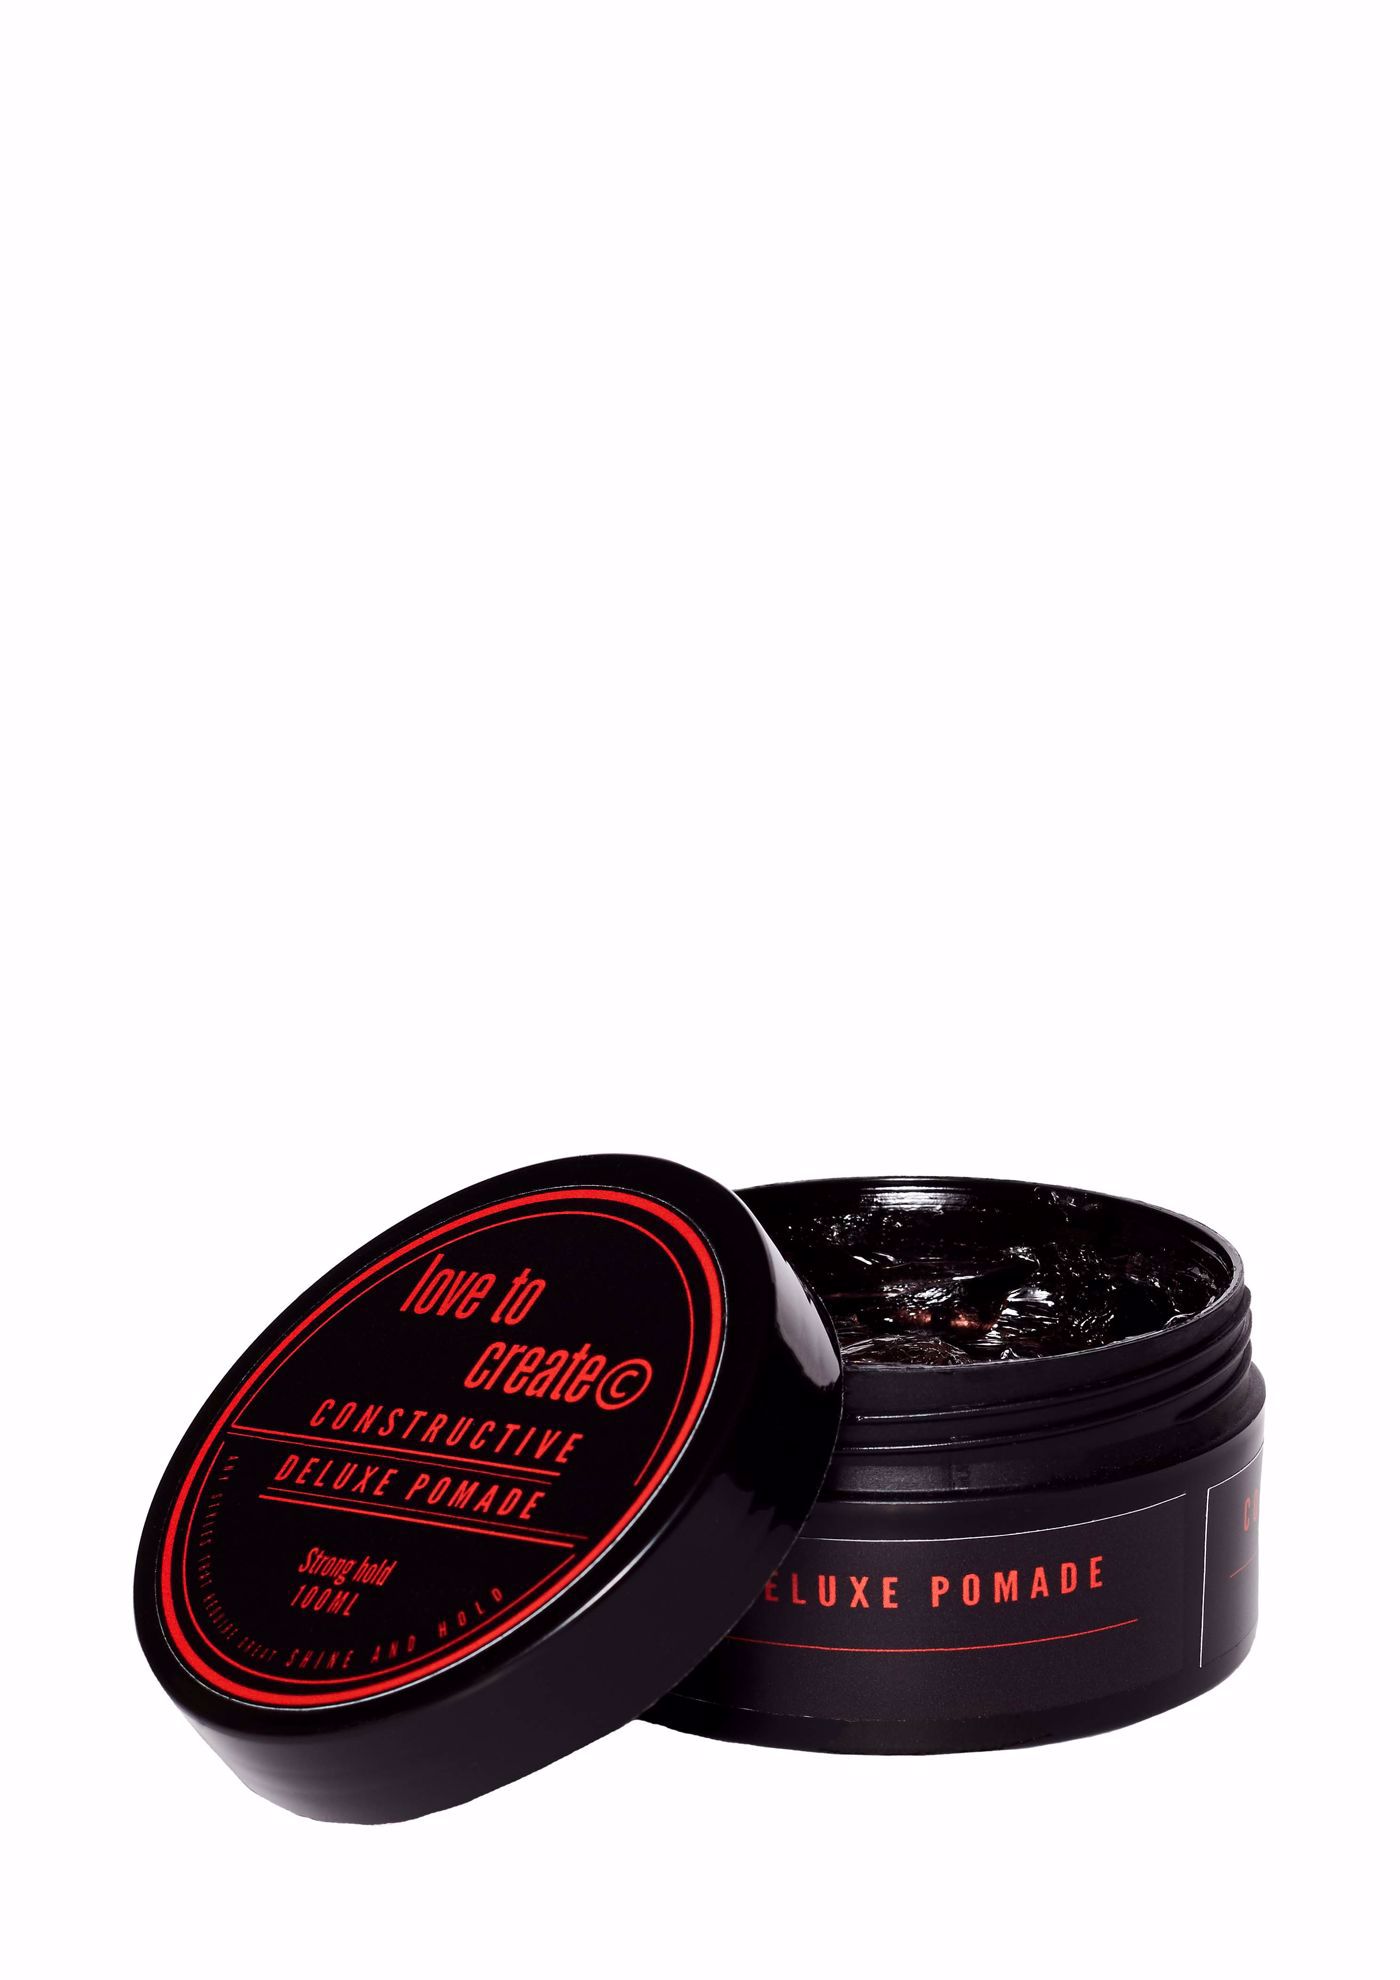 Our strong hold pomade, can shape and style as required to achieve a classic high gloss finish. 